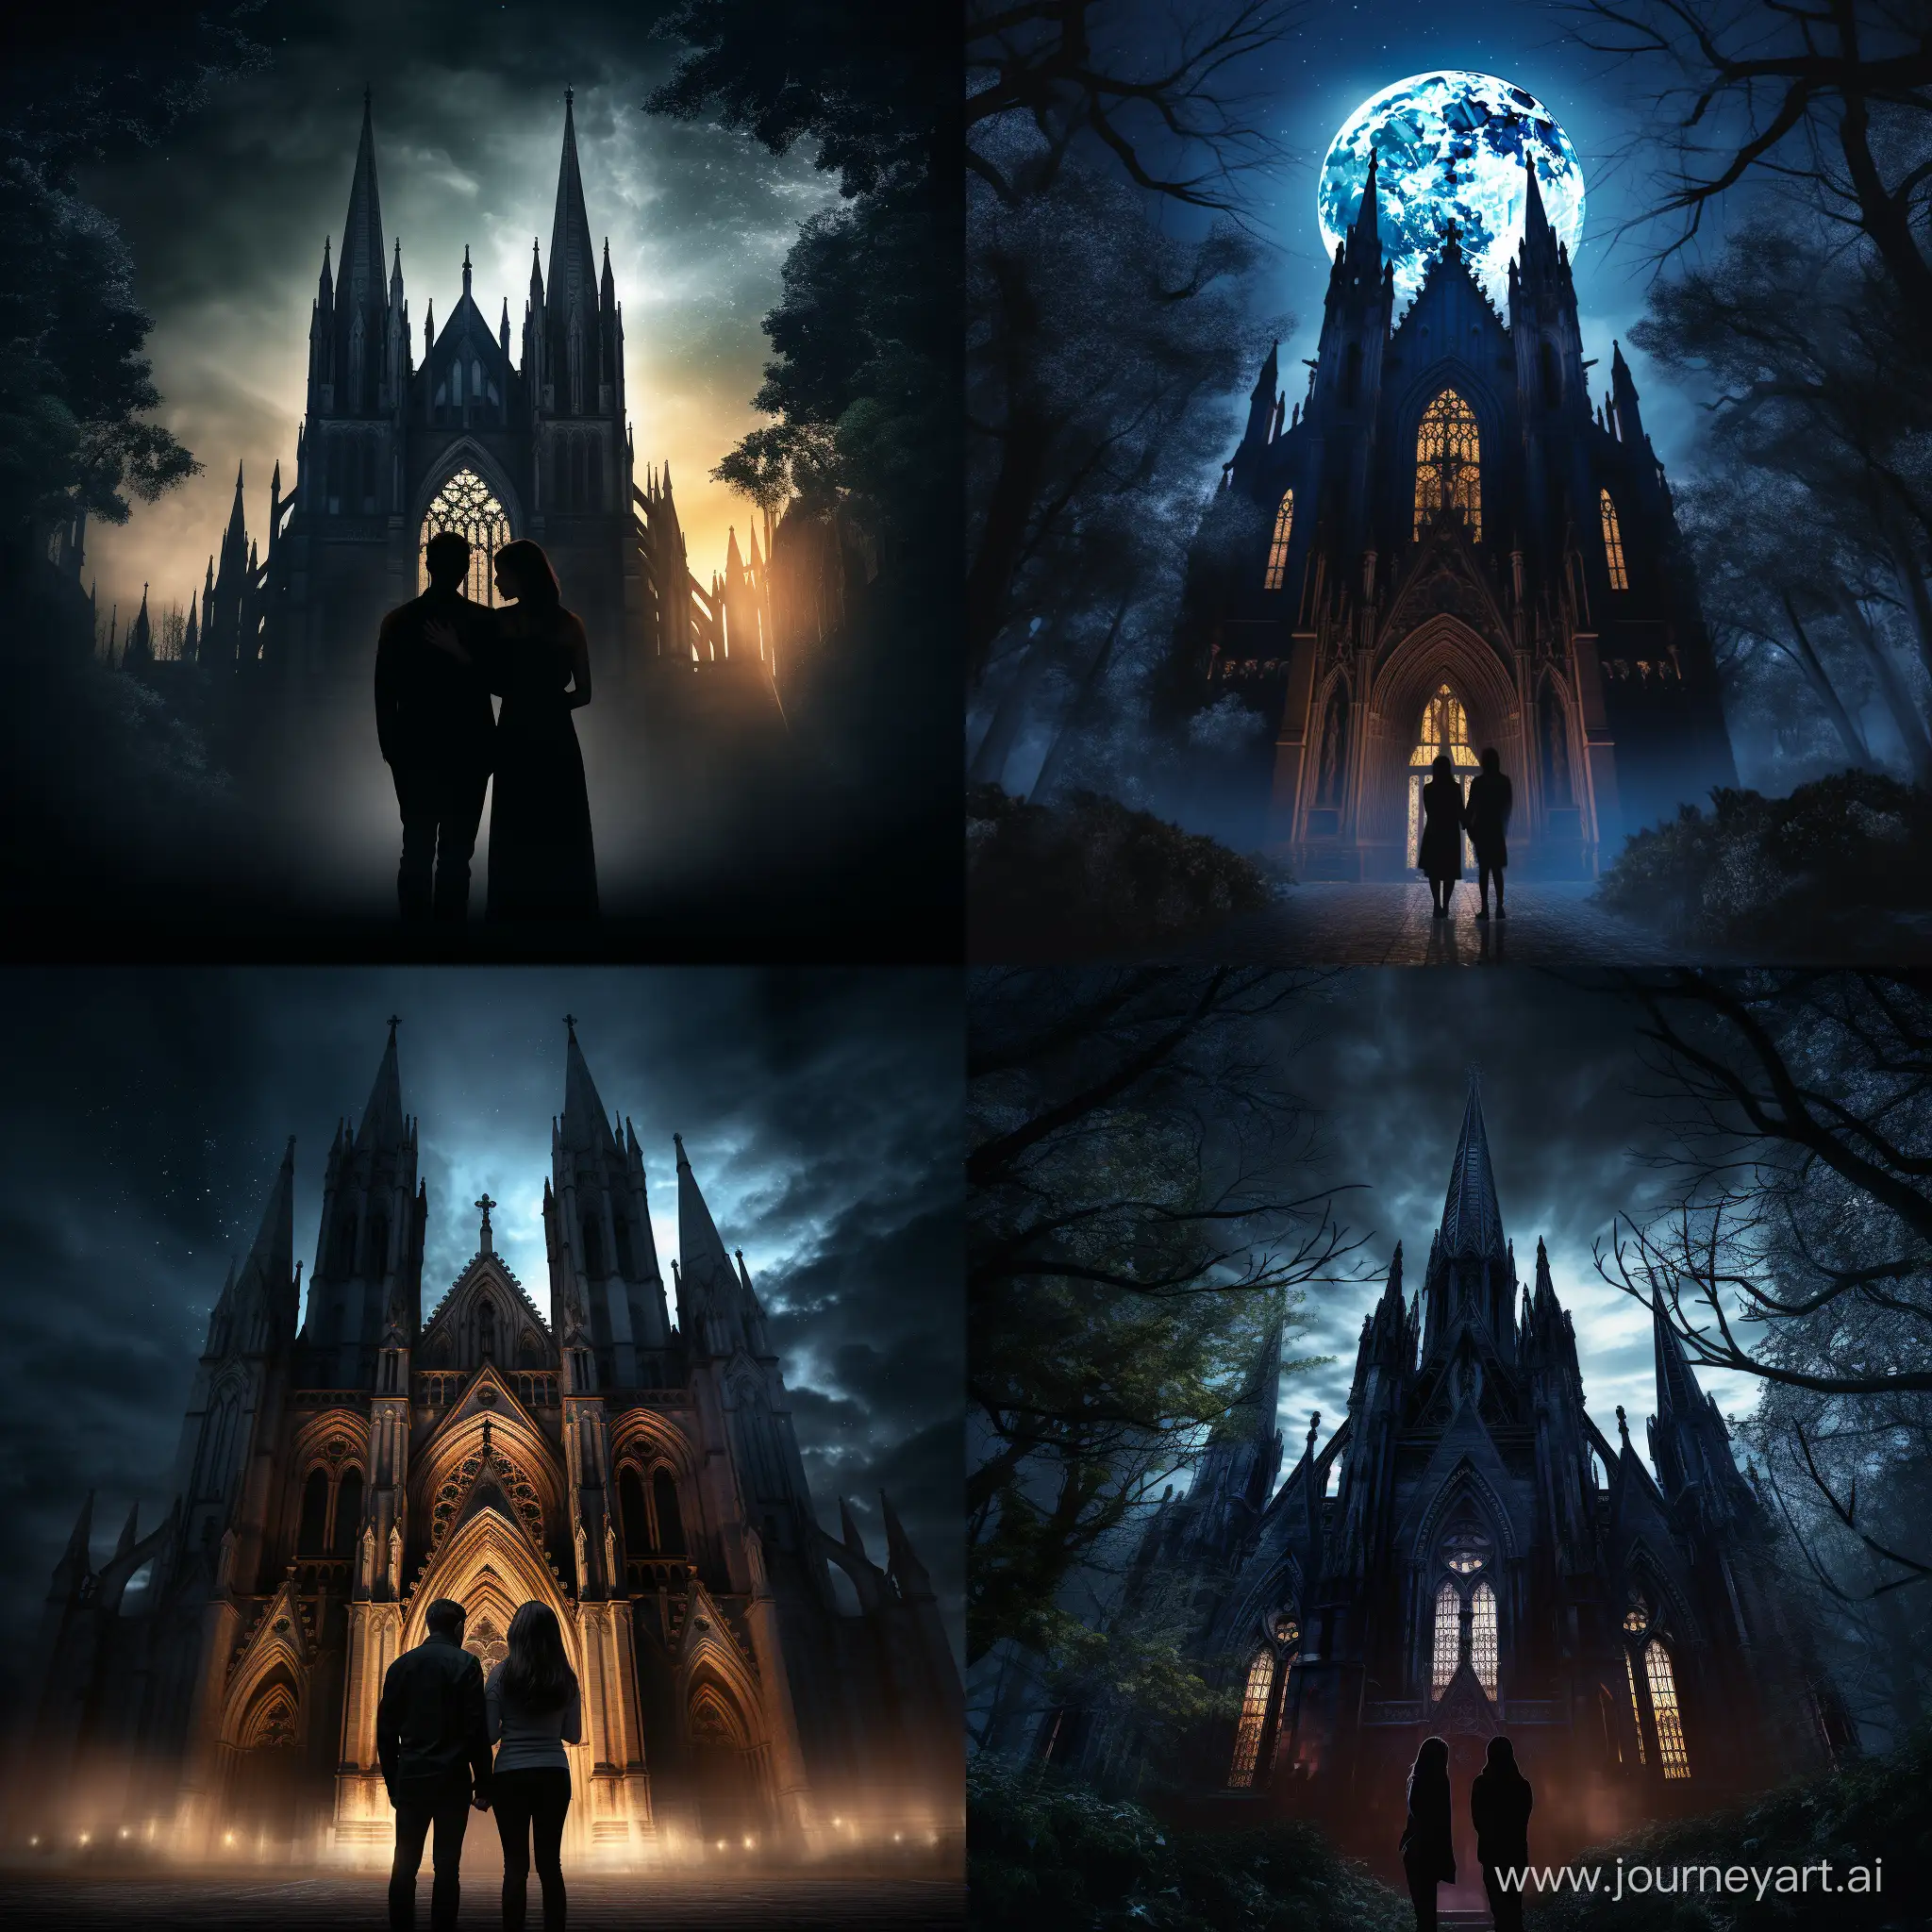 A creepy couple, illuminated by moonlight, embracing in front of a grand and towering gothic cathedral. The couple's pale skin contrasts against the dark surroundings, and their eyes glow with an eerie light. The cathedral's intricate architectural details are rendered with hyper-realistic precision, capturing the solemnity and gloomy atmosphere. The image is styled in a realistic manner, reminiscent of the works of Edward Hopper and Salvador Dali. --ar 1:1 --s 150 --c 5 --v 5.2